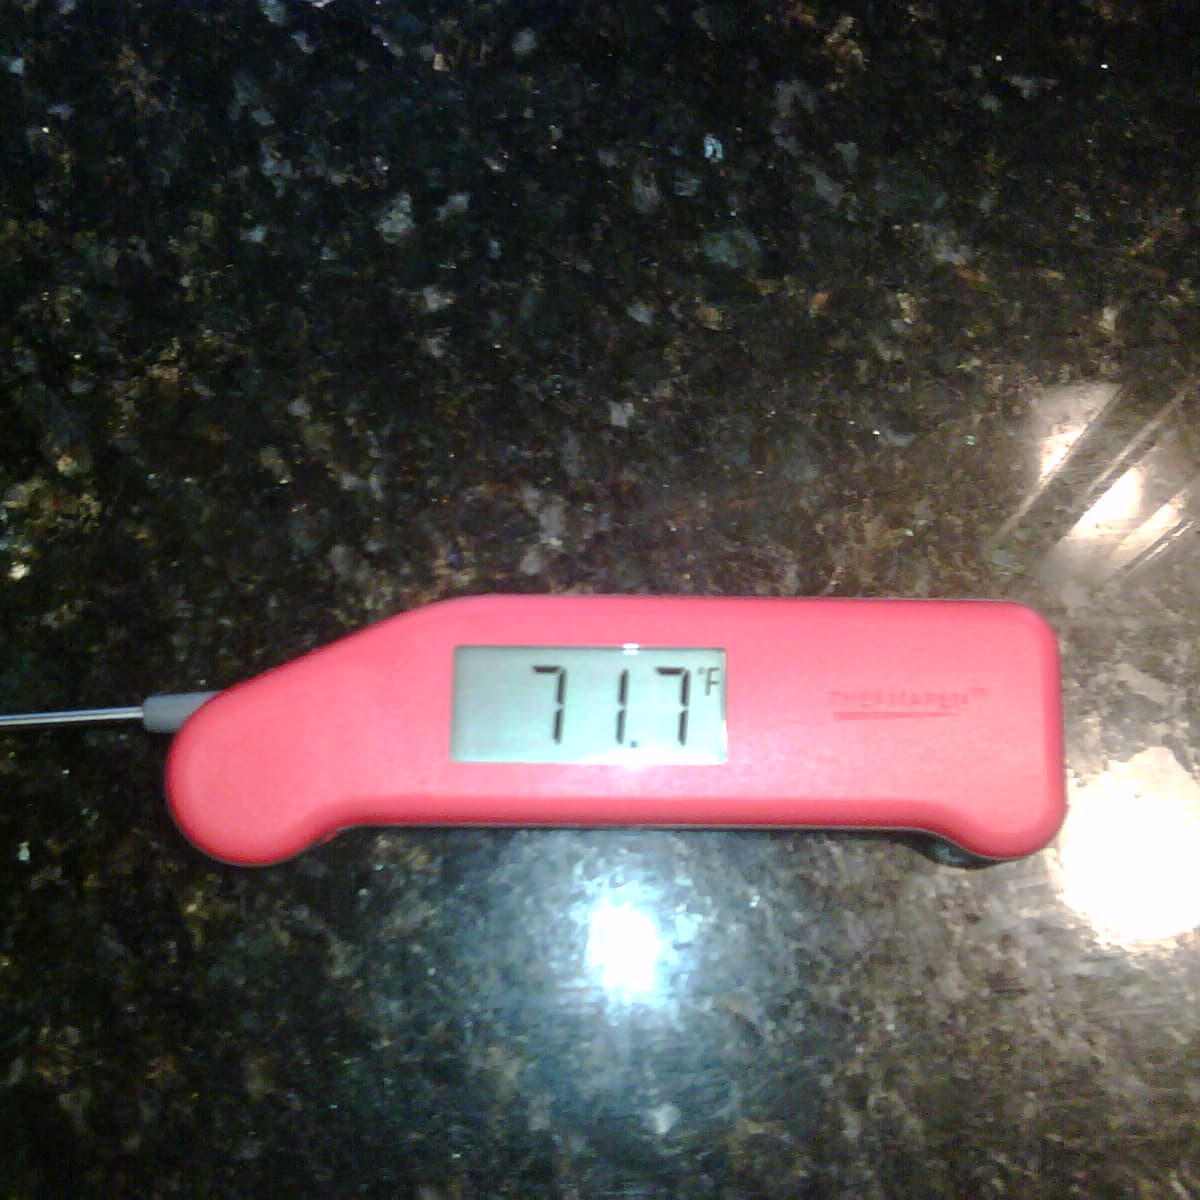 What Makes Thermapen ONE the Best? 